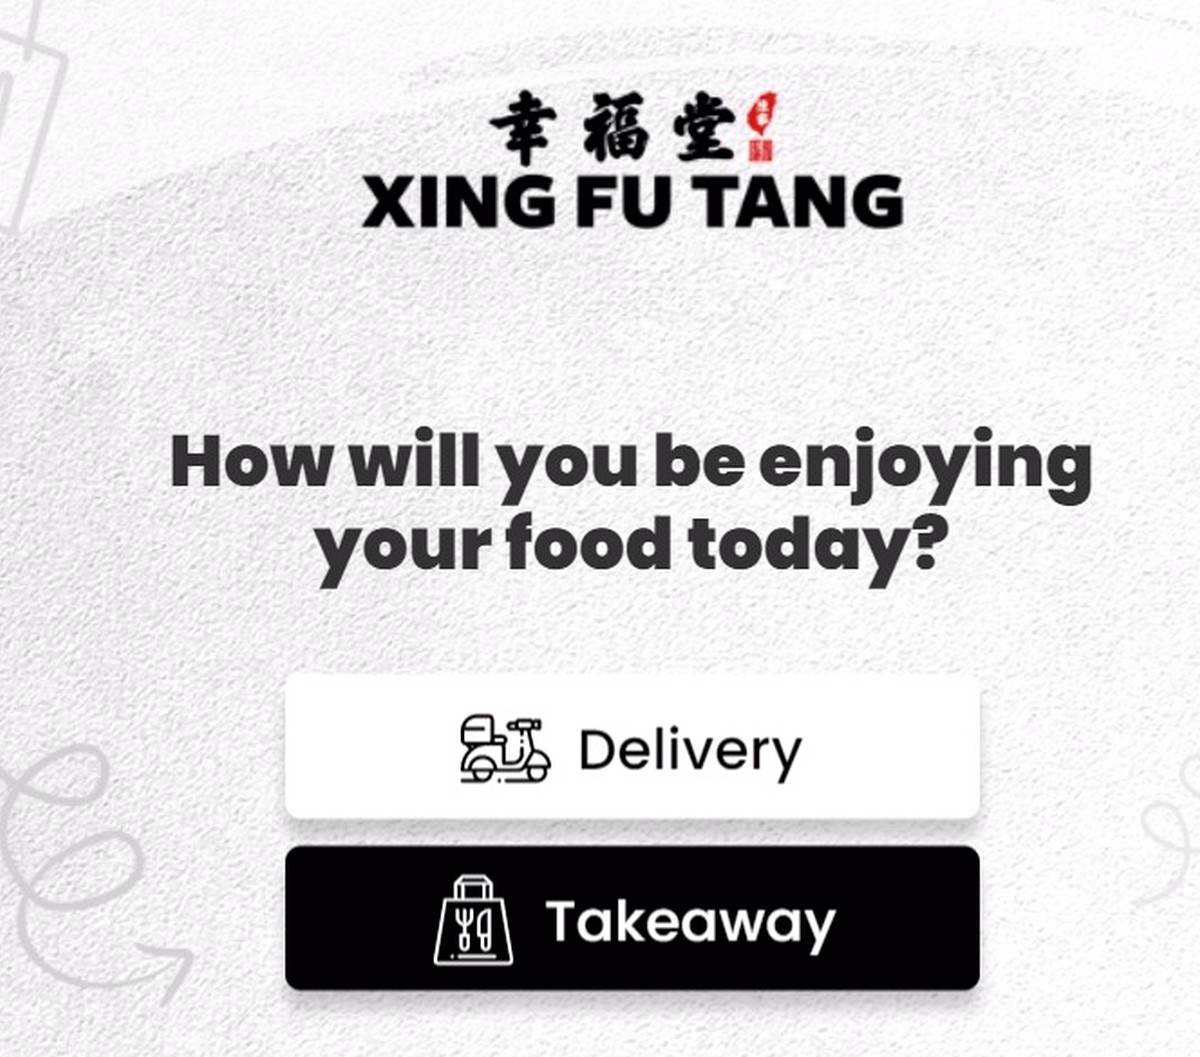 Welcome-to-Xing-Fu-Tang-1-for-1-Birthday-Anniversary-Promotion-Beverages-Offers 1-30 Jun 2021: Xing Fu Tang Happy 2nd Birthday 1-For-1 Promo on Thailand Series Milk Tea for Delivery & Takeaway at All Outlets in Singapore